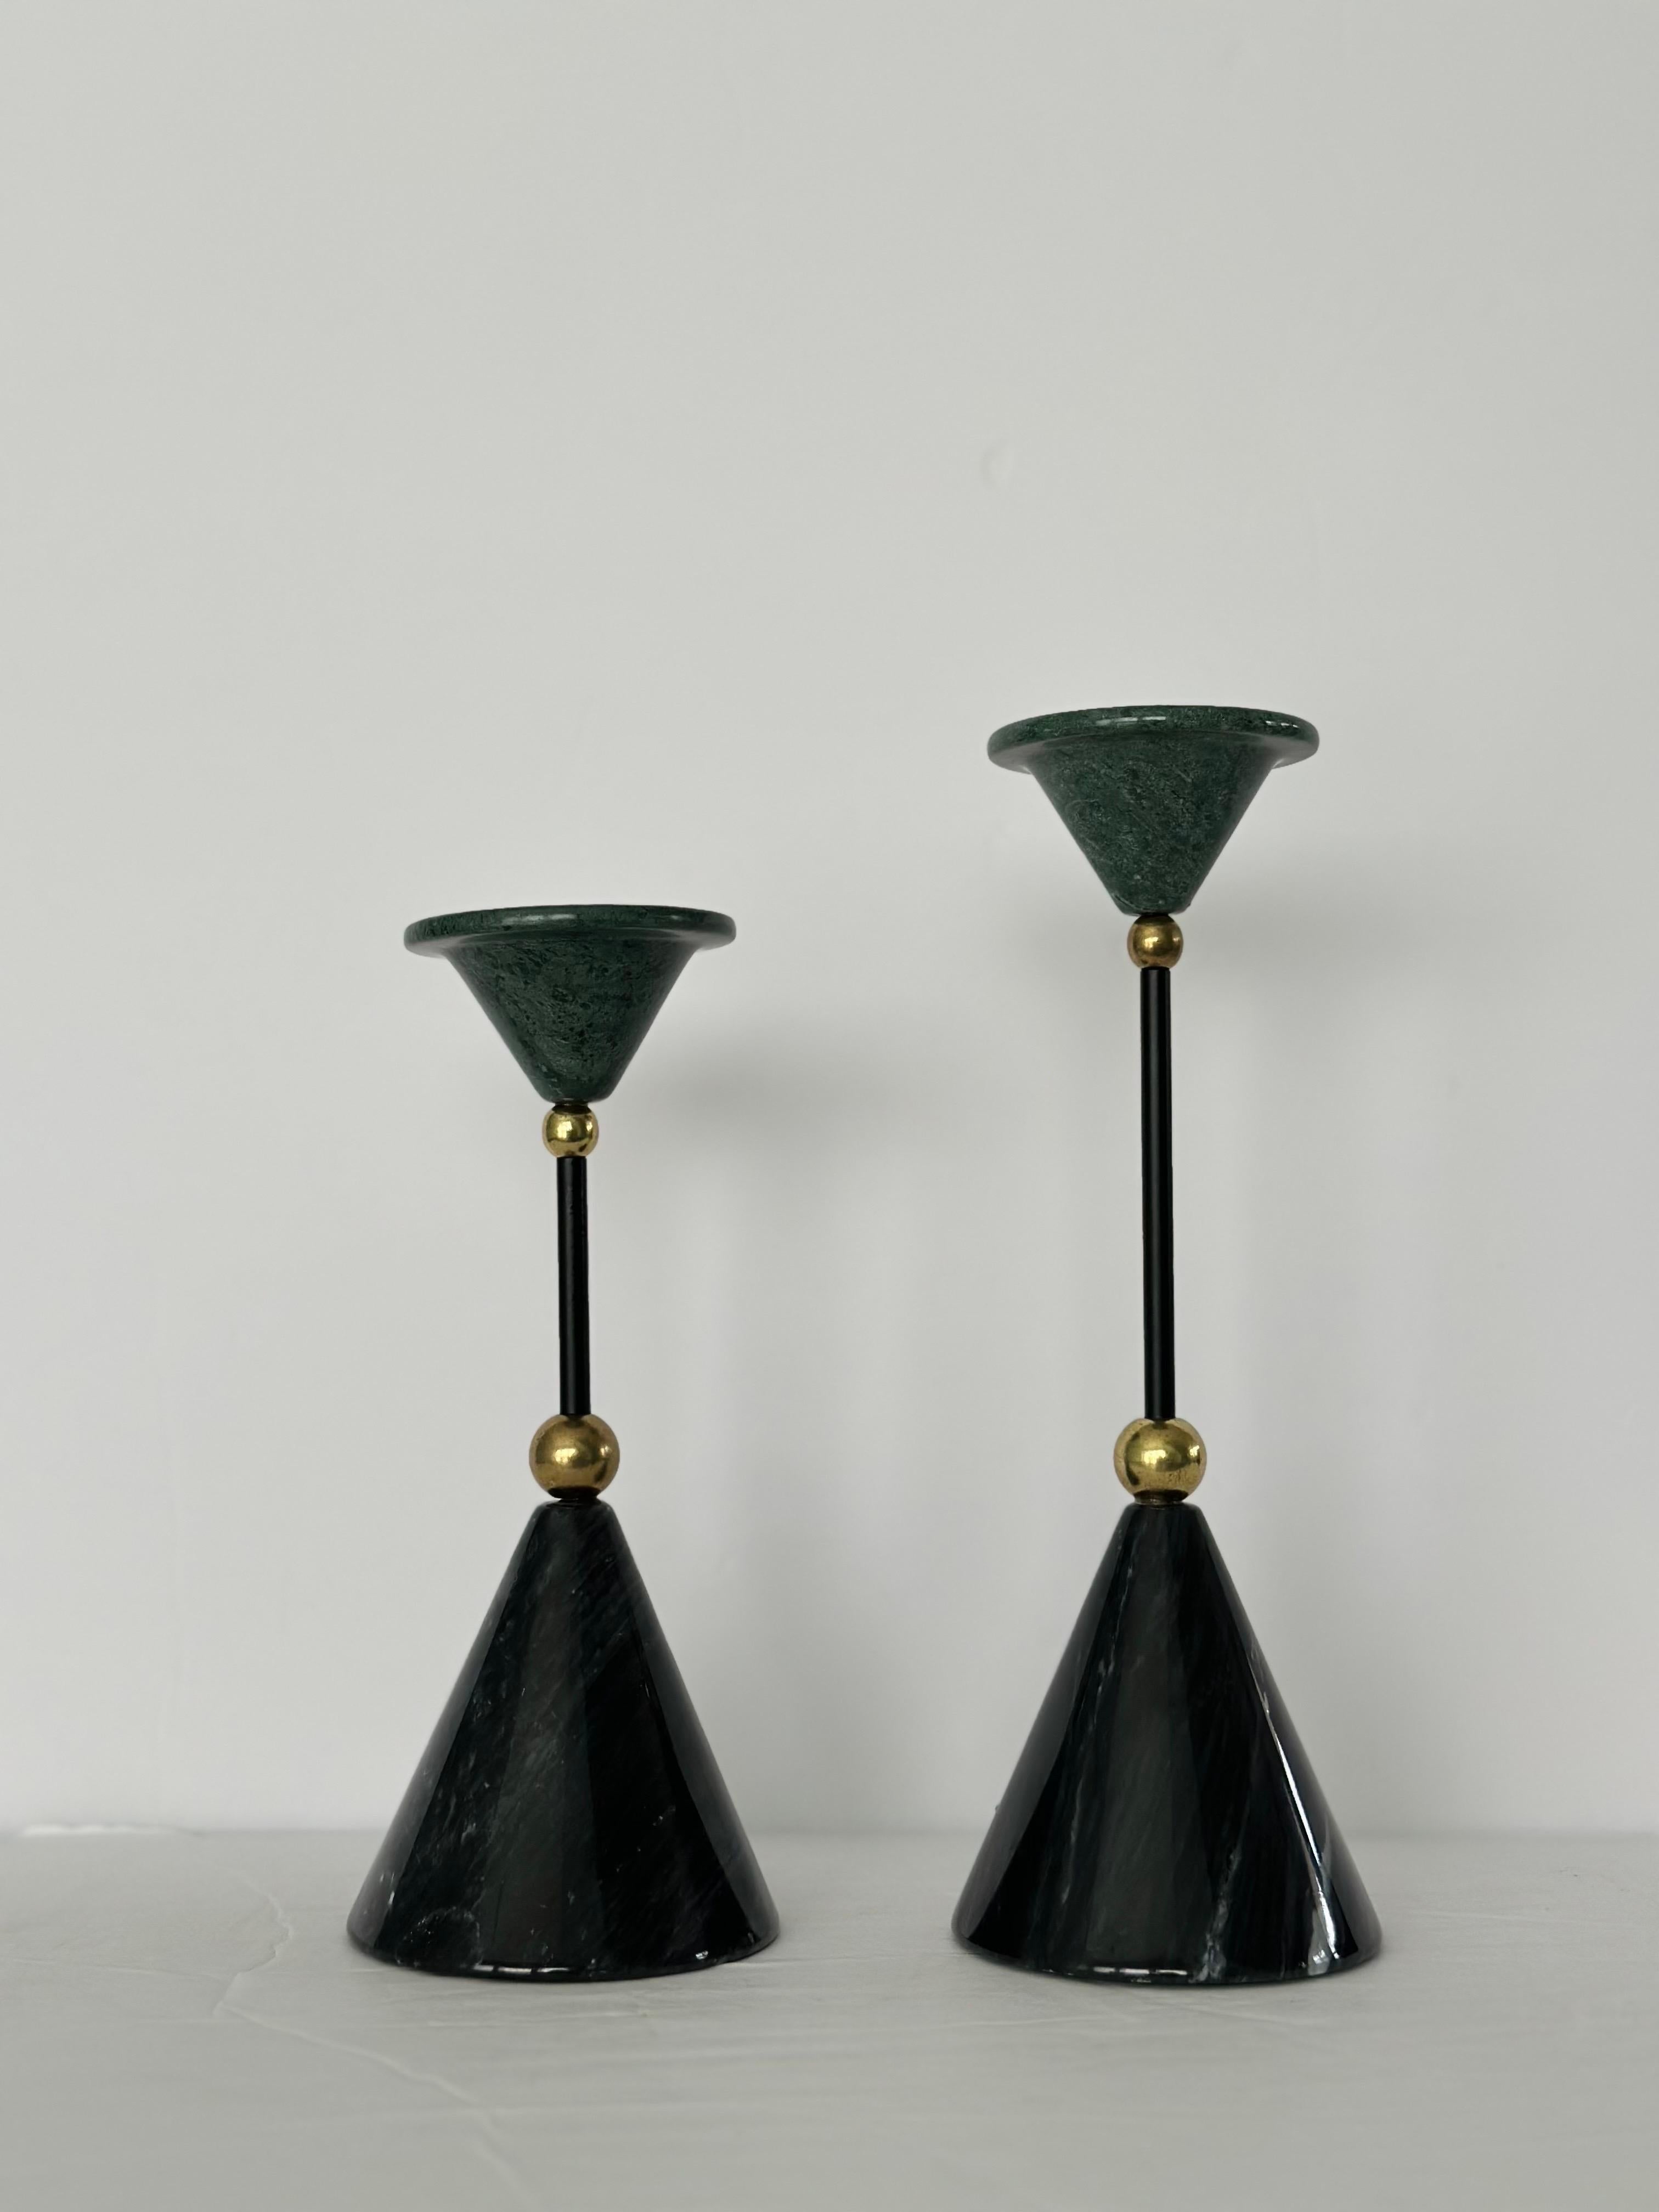 Post-Modern 1980s Avant-Garde Black and Green Marble Stone Brass Cones Candlesticks - a Pair For Sale